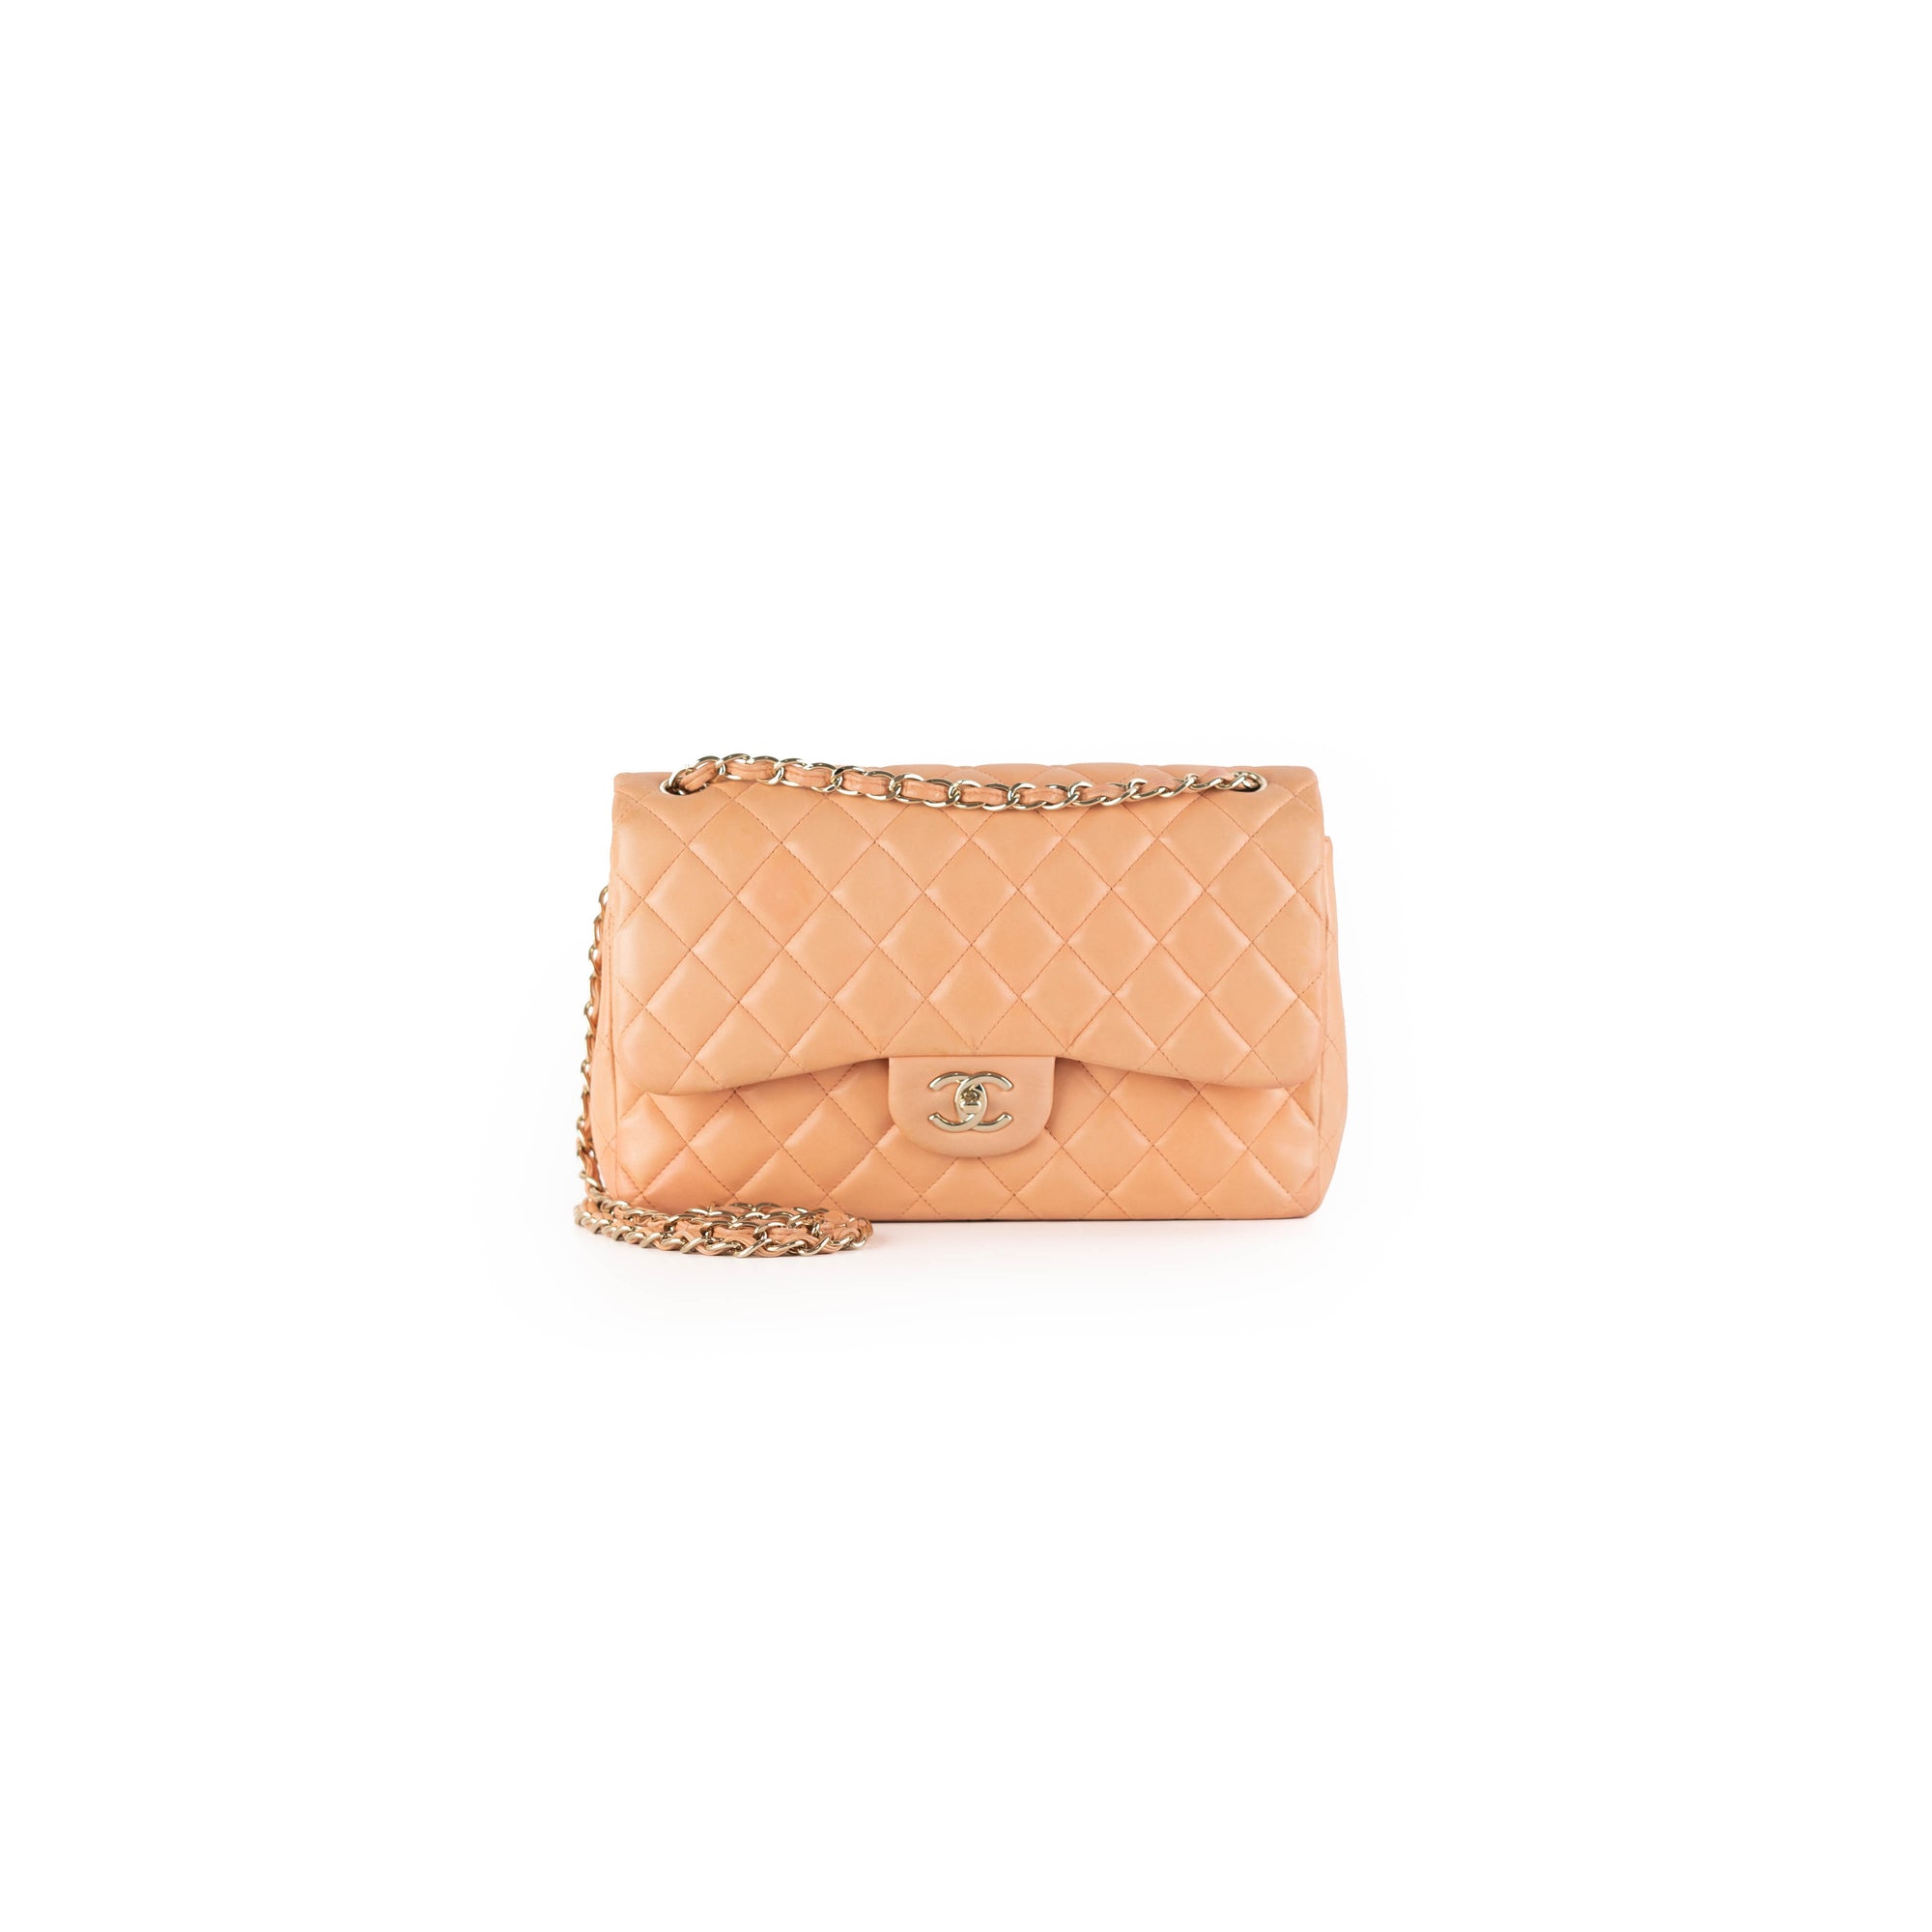 Chanel Classic 255 Medium Flap in Baby Pink Caviar with Gold Hardware   SOLD